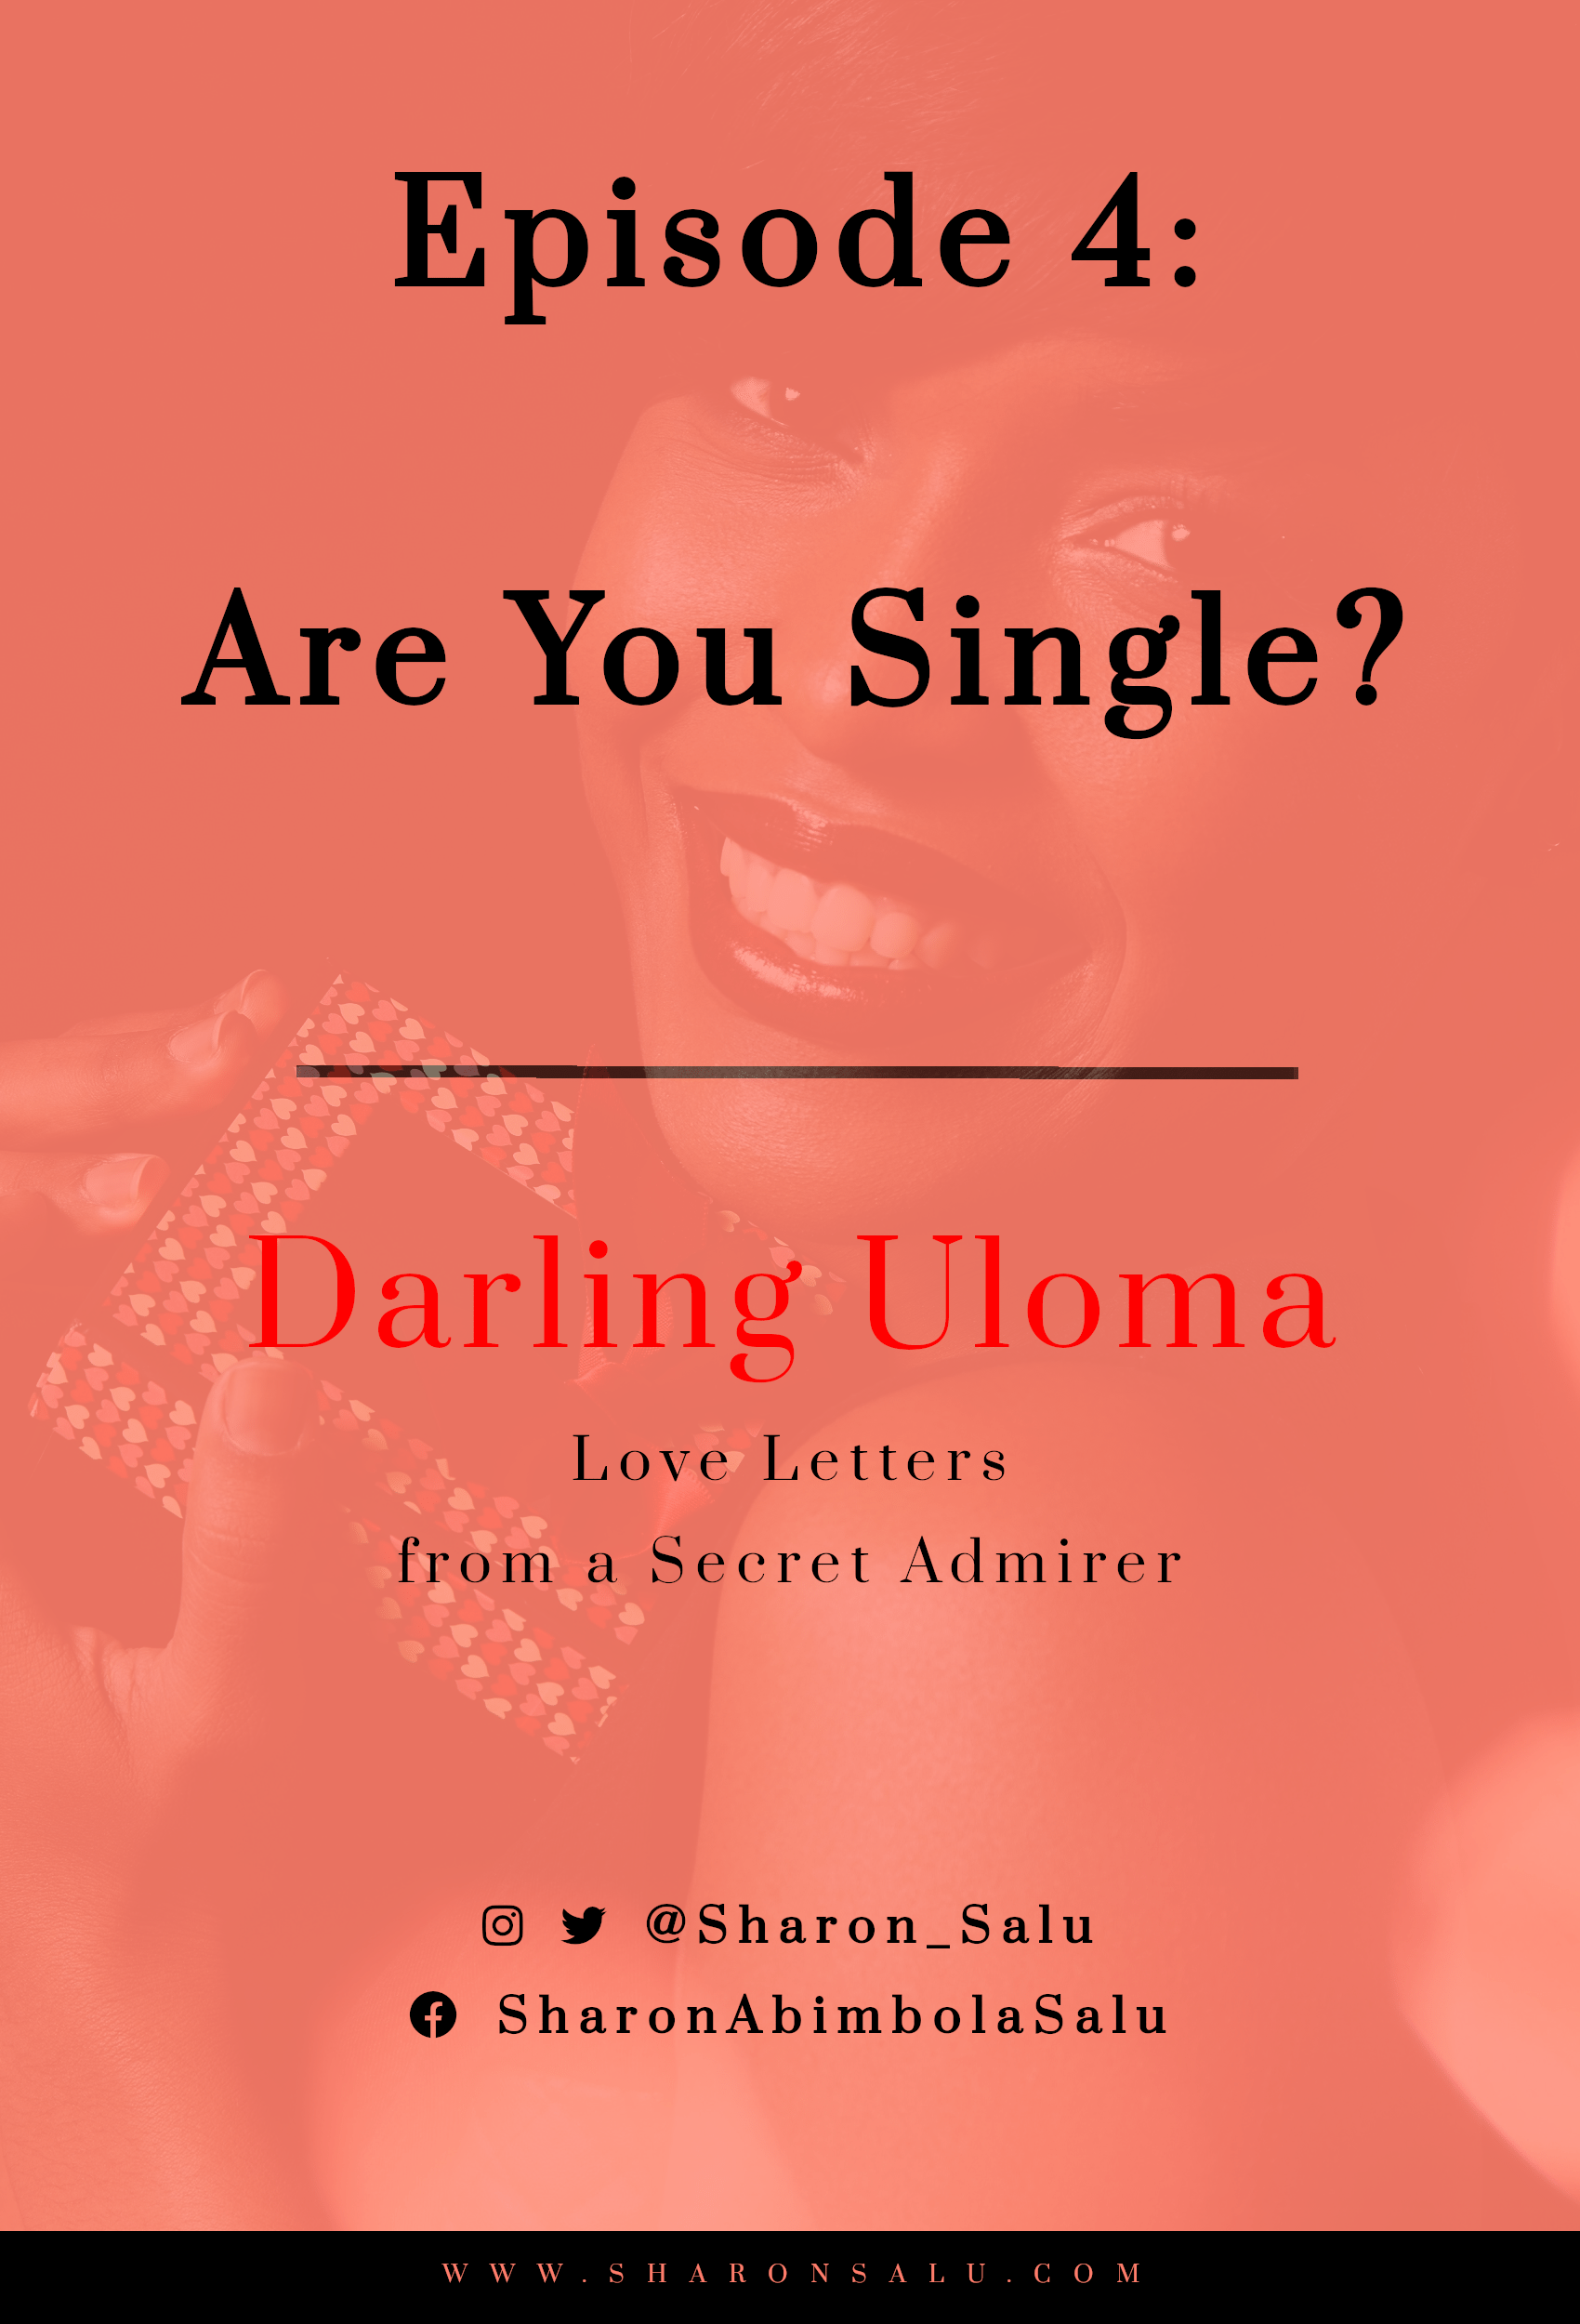 Darling Uloma Love Letters from a Secret Admirer - Episode 4 - Are you single?